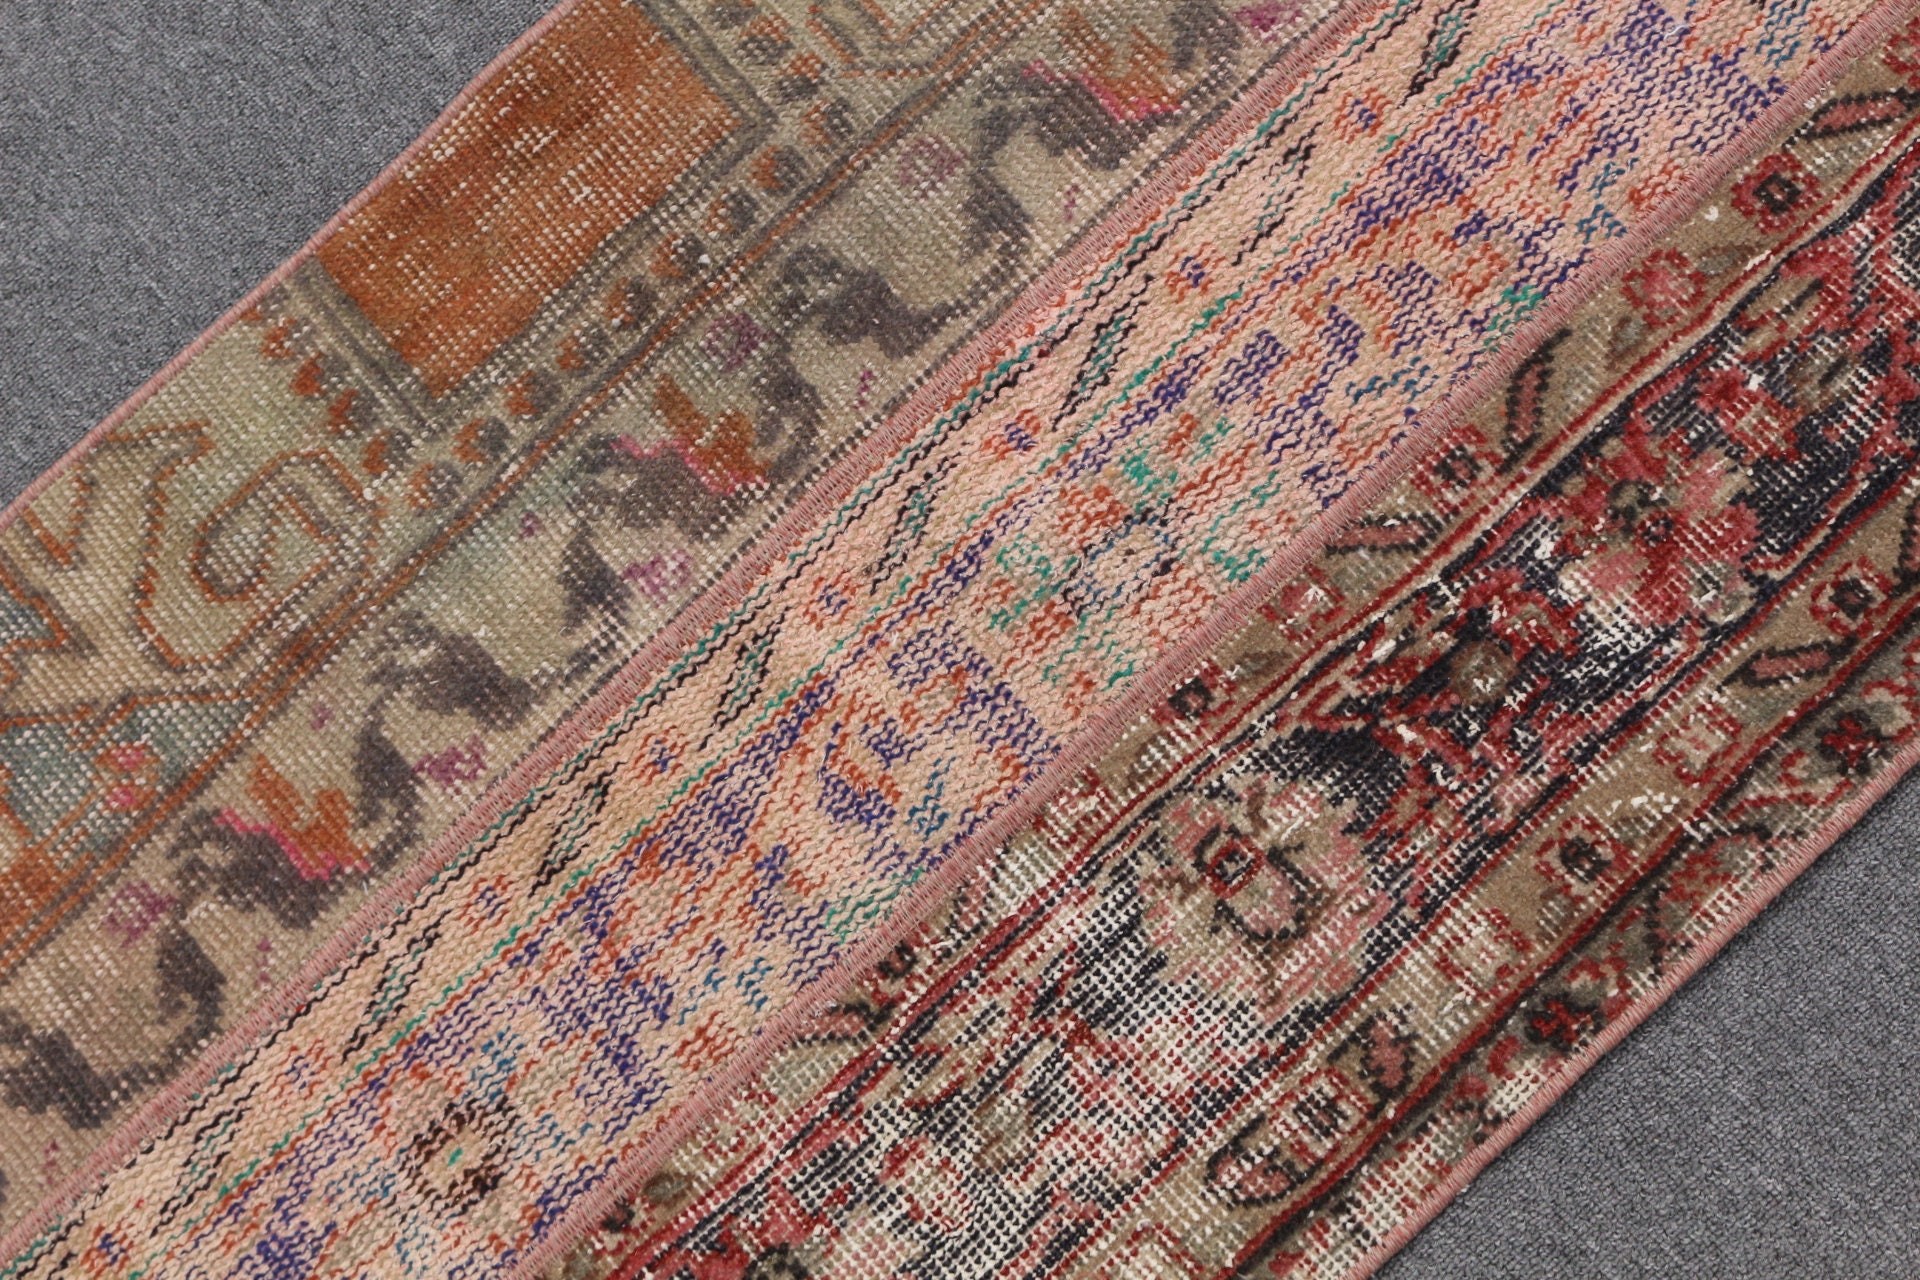 Entry Rugs, Hand Woven Rug, Brown Home Decor Rug, Vintage Rug, Turkish Rug, Bedroom Rug, 2.1x3.3 ft Small Rug, Moroccan Rugs, Kitchen Rugs